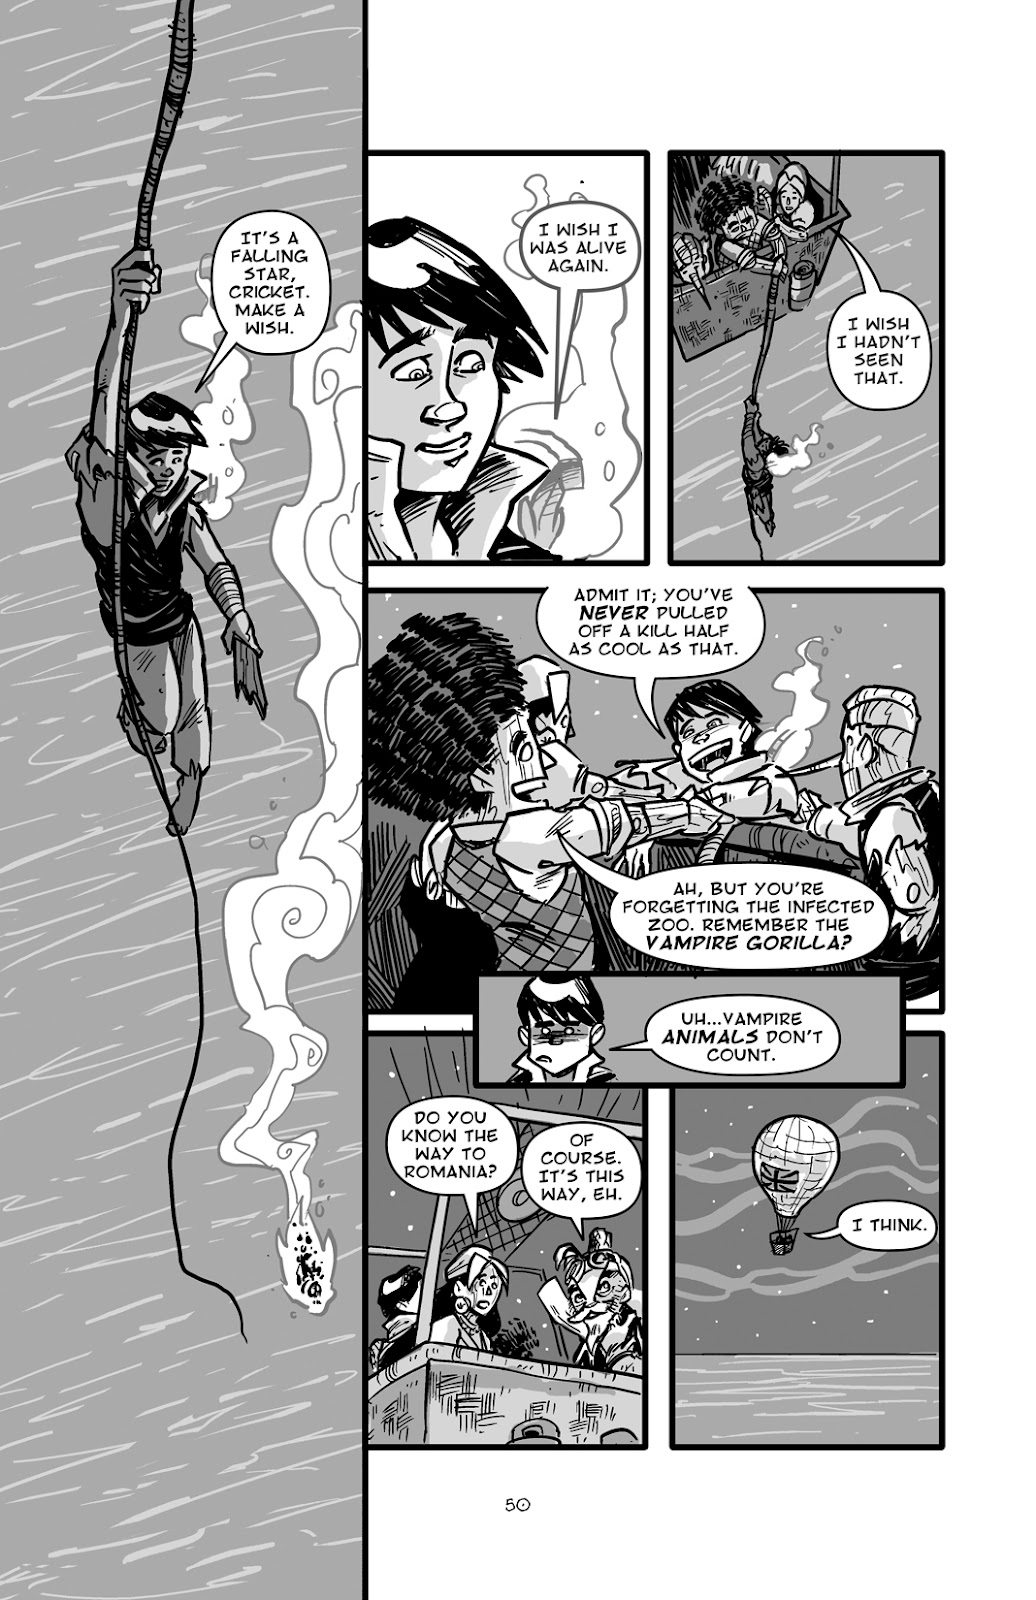 Pinocchio: Vampire Slayer - Of Wood and Blood issue 2 - Page 24